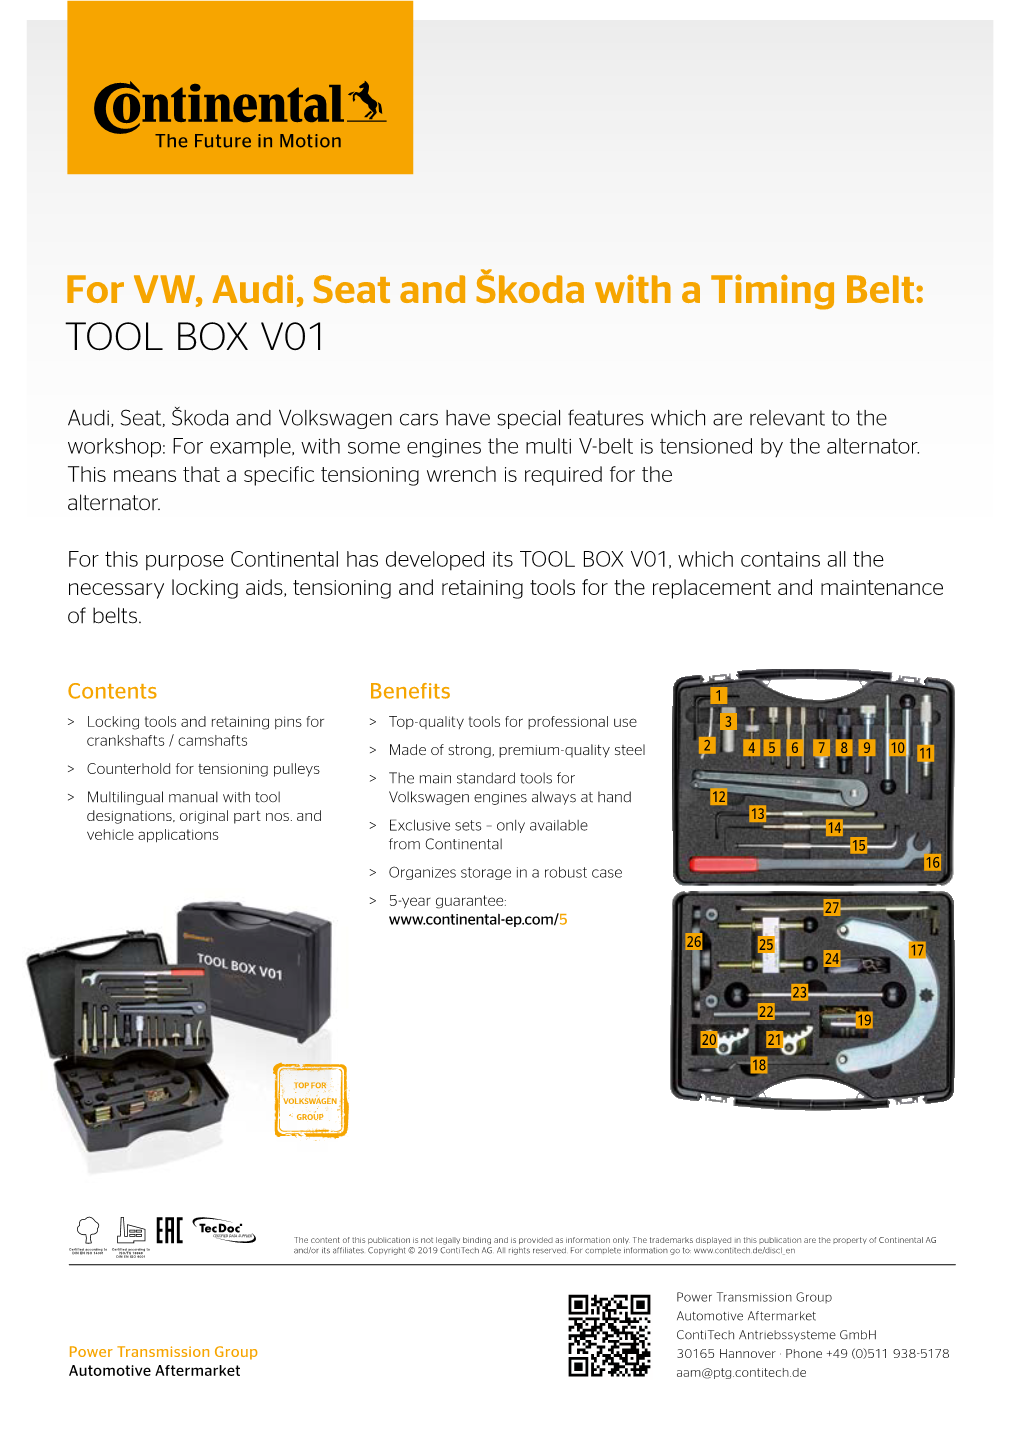 For VW, Audi, Seat and Škoda with a Timing Belt: TOOL BOX V01